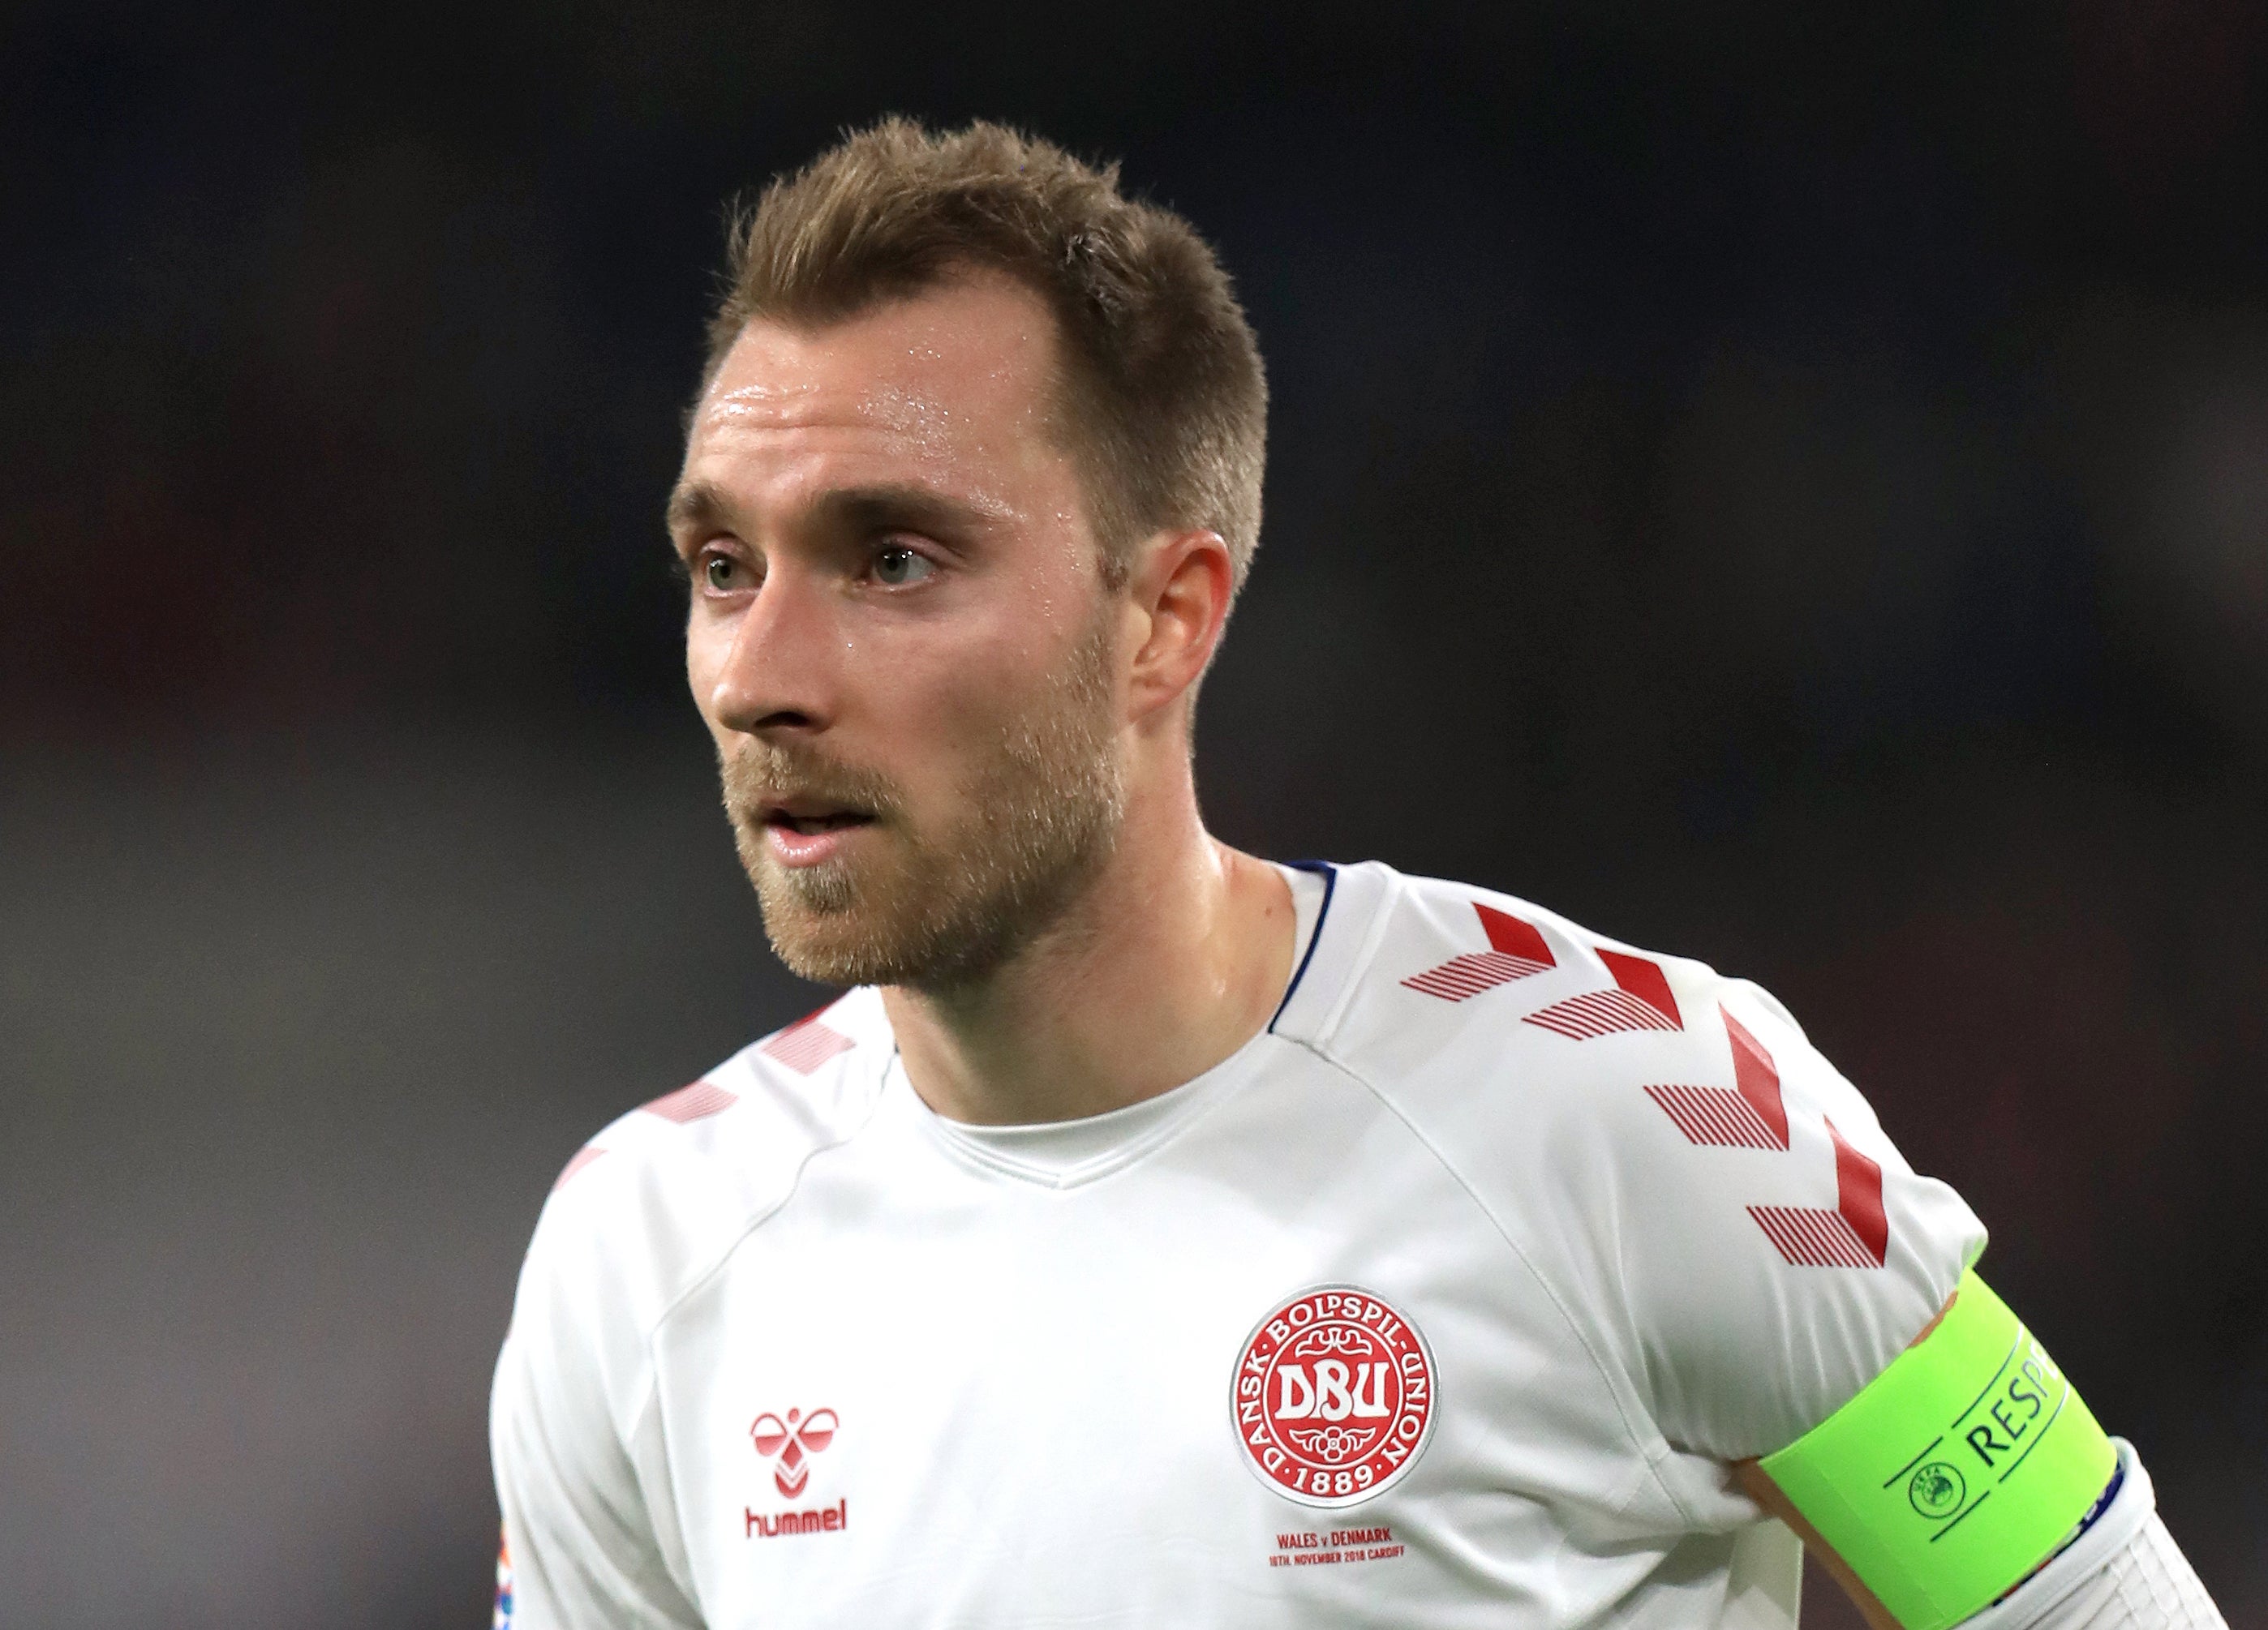 Christian Eriksen has been linked with a return to the Premier League